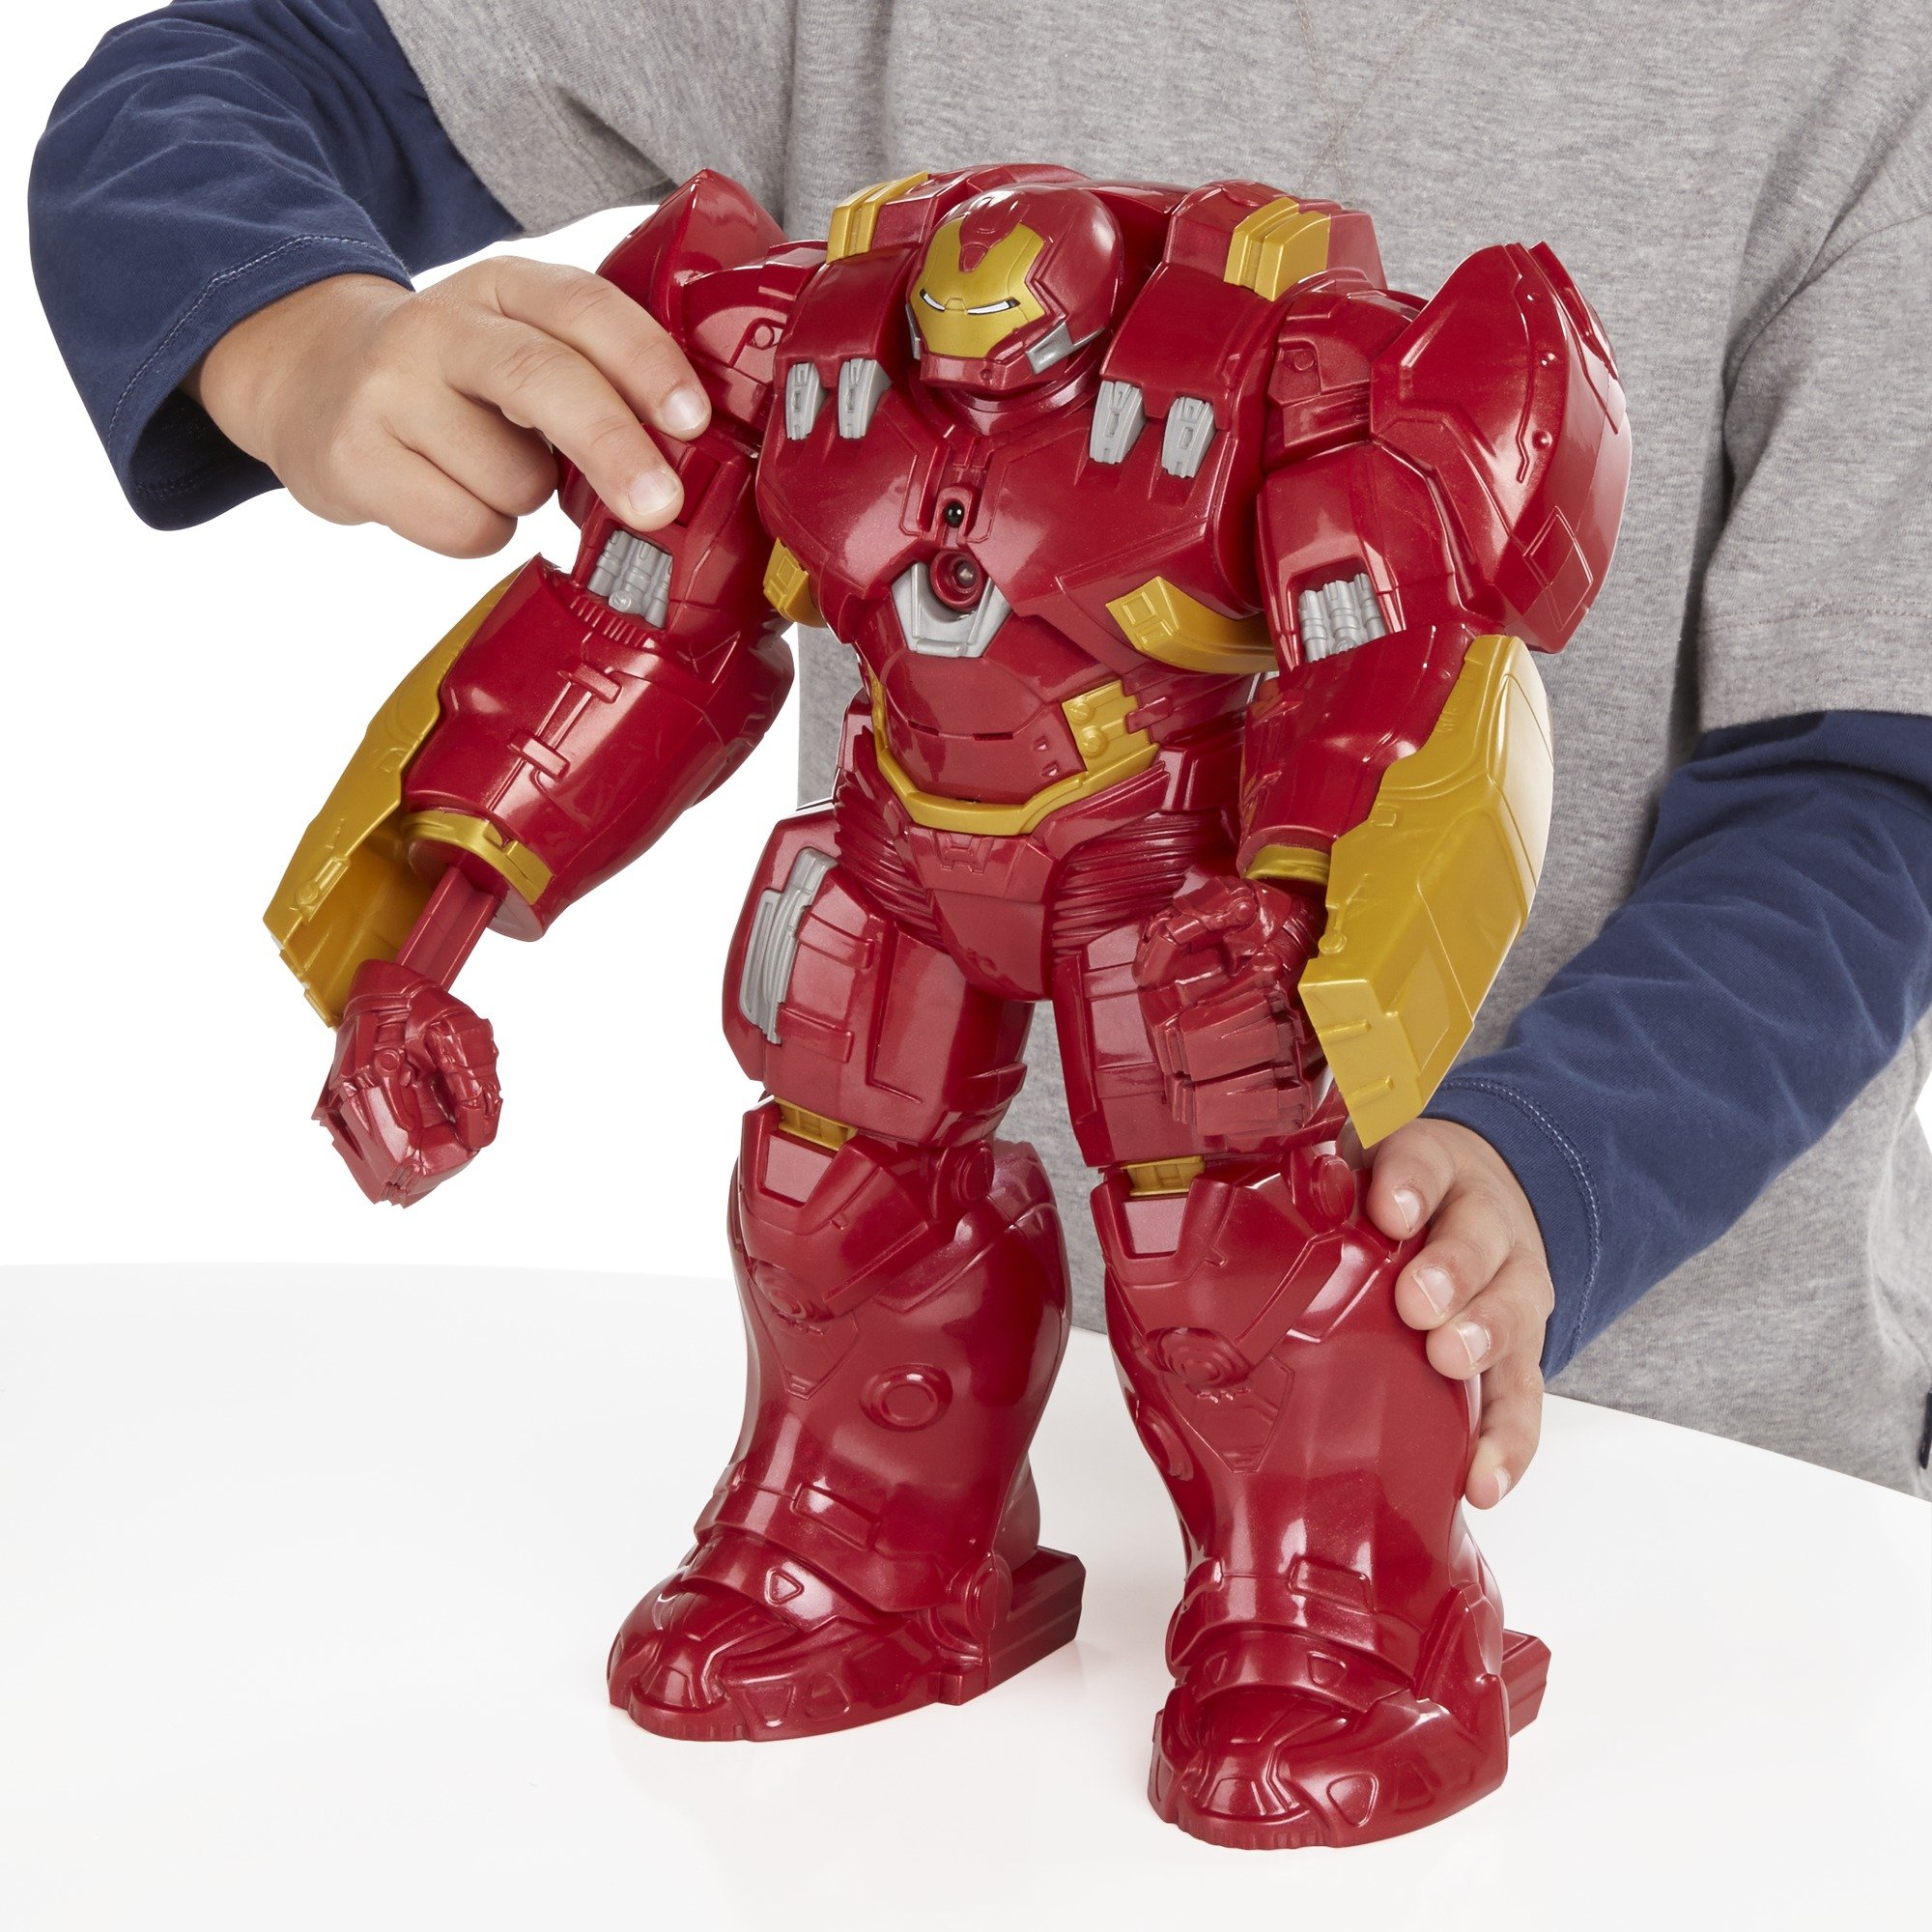 Marvel Avengers Titan Hero Tech Interactive Hulk Buster 12 Inch Figure(Discontinued by manufacturer)